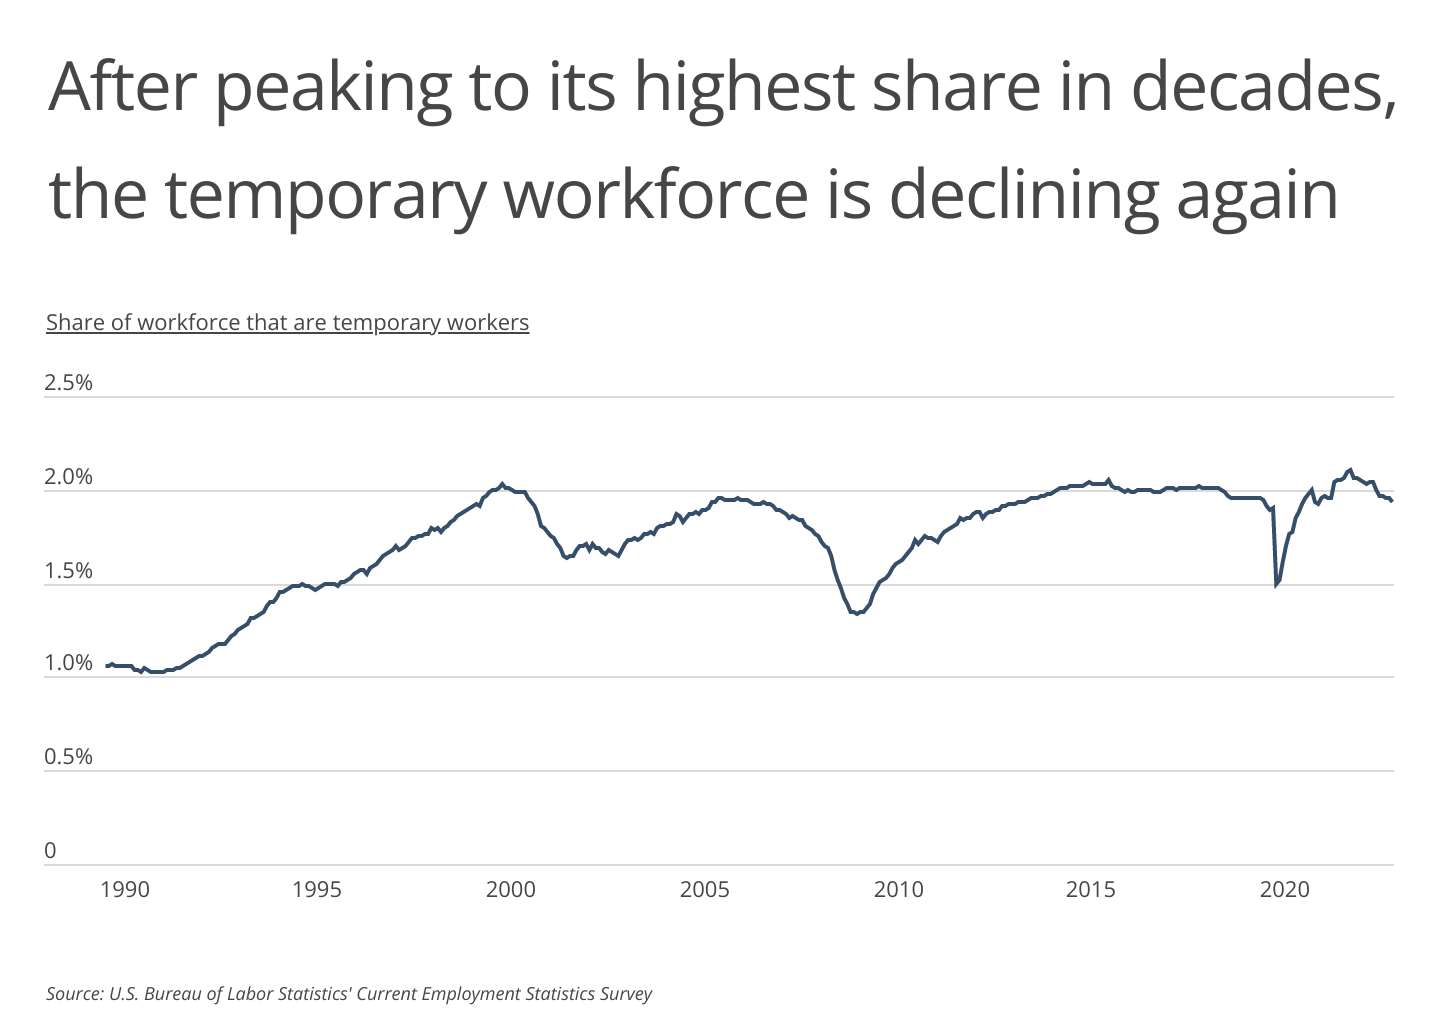 Chart1_Temp workforce is declining after peaking to highest share in decades